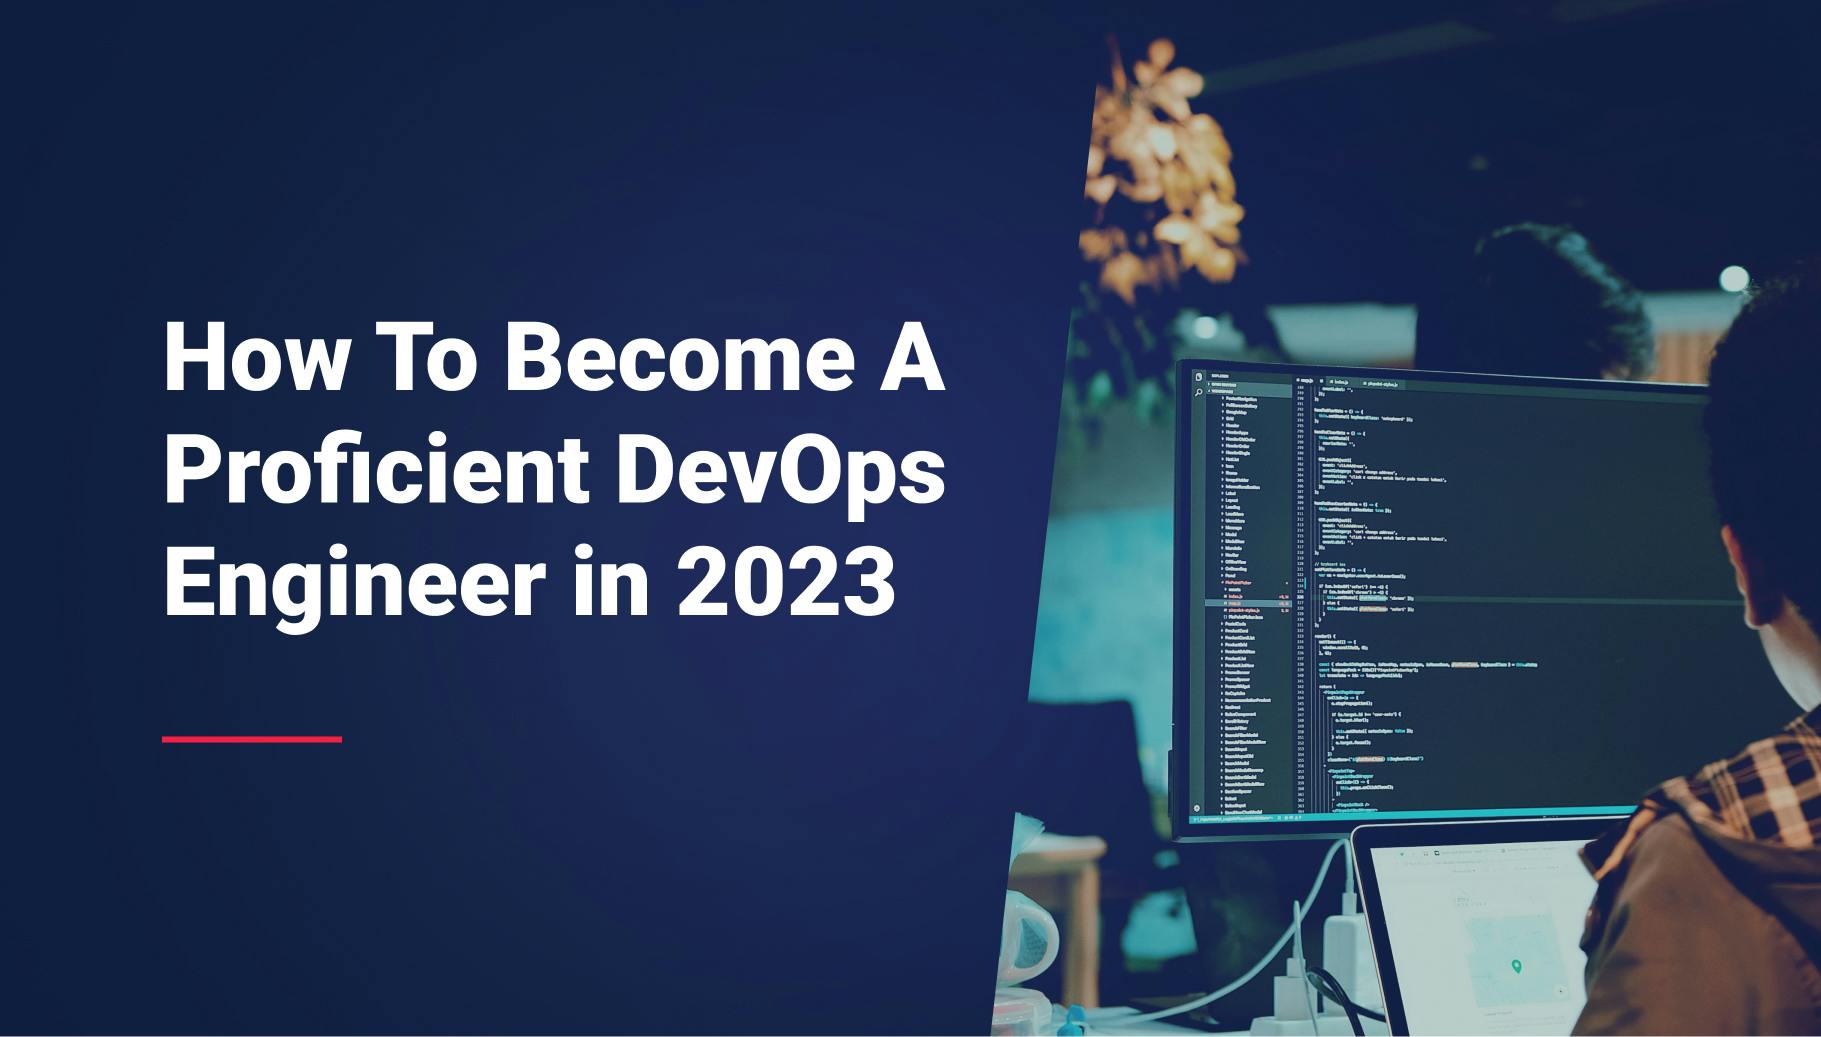 How To Become A Proficient DevOps Engineer in 2023 - Qovery